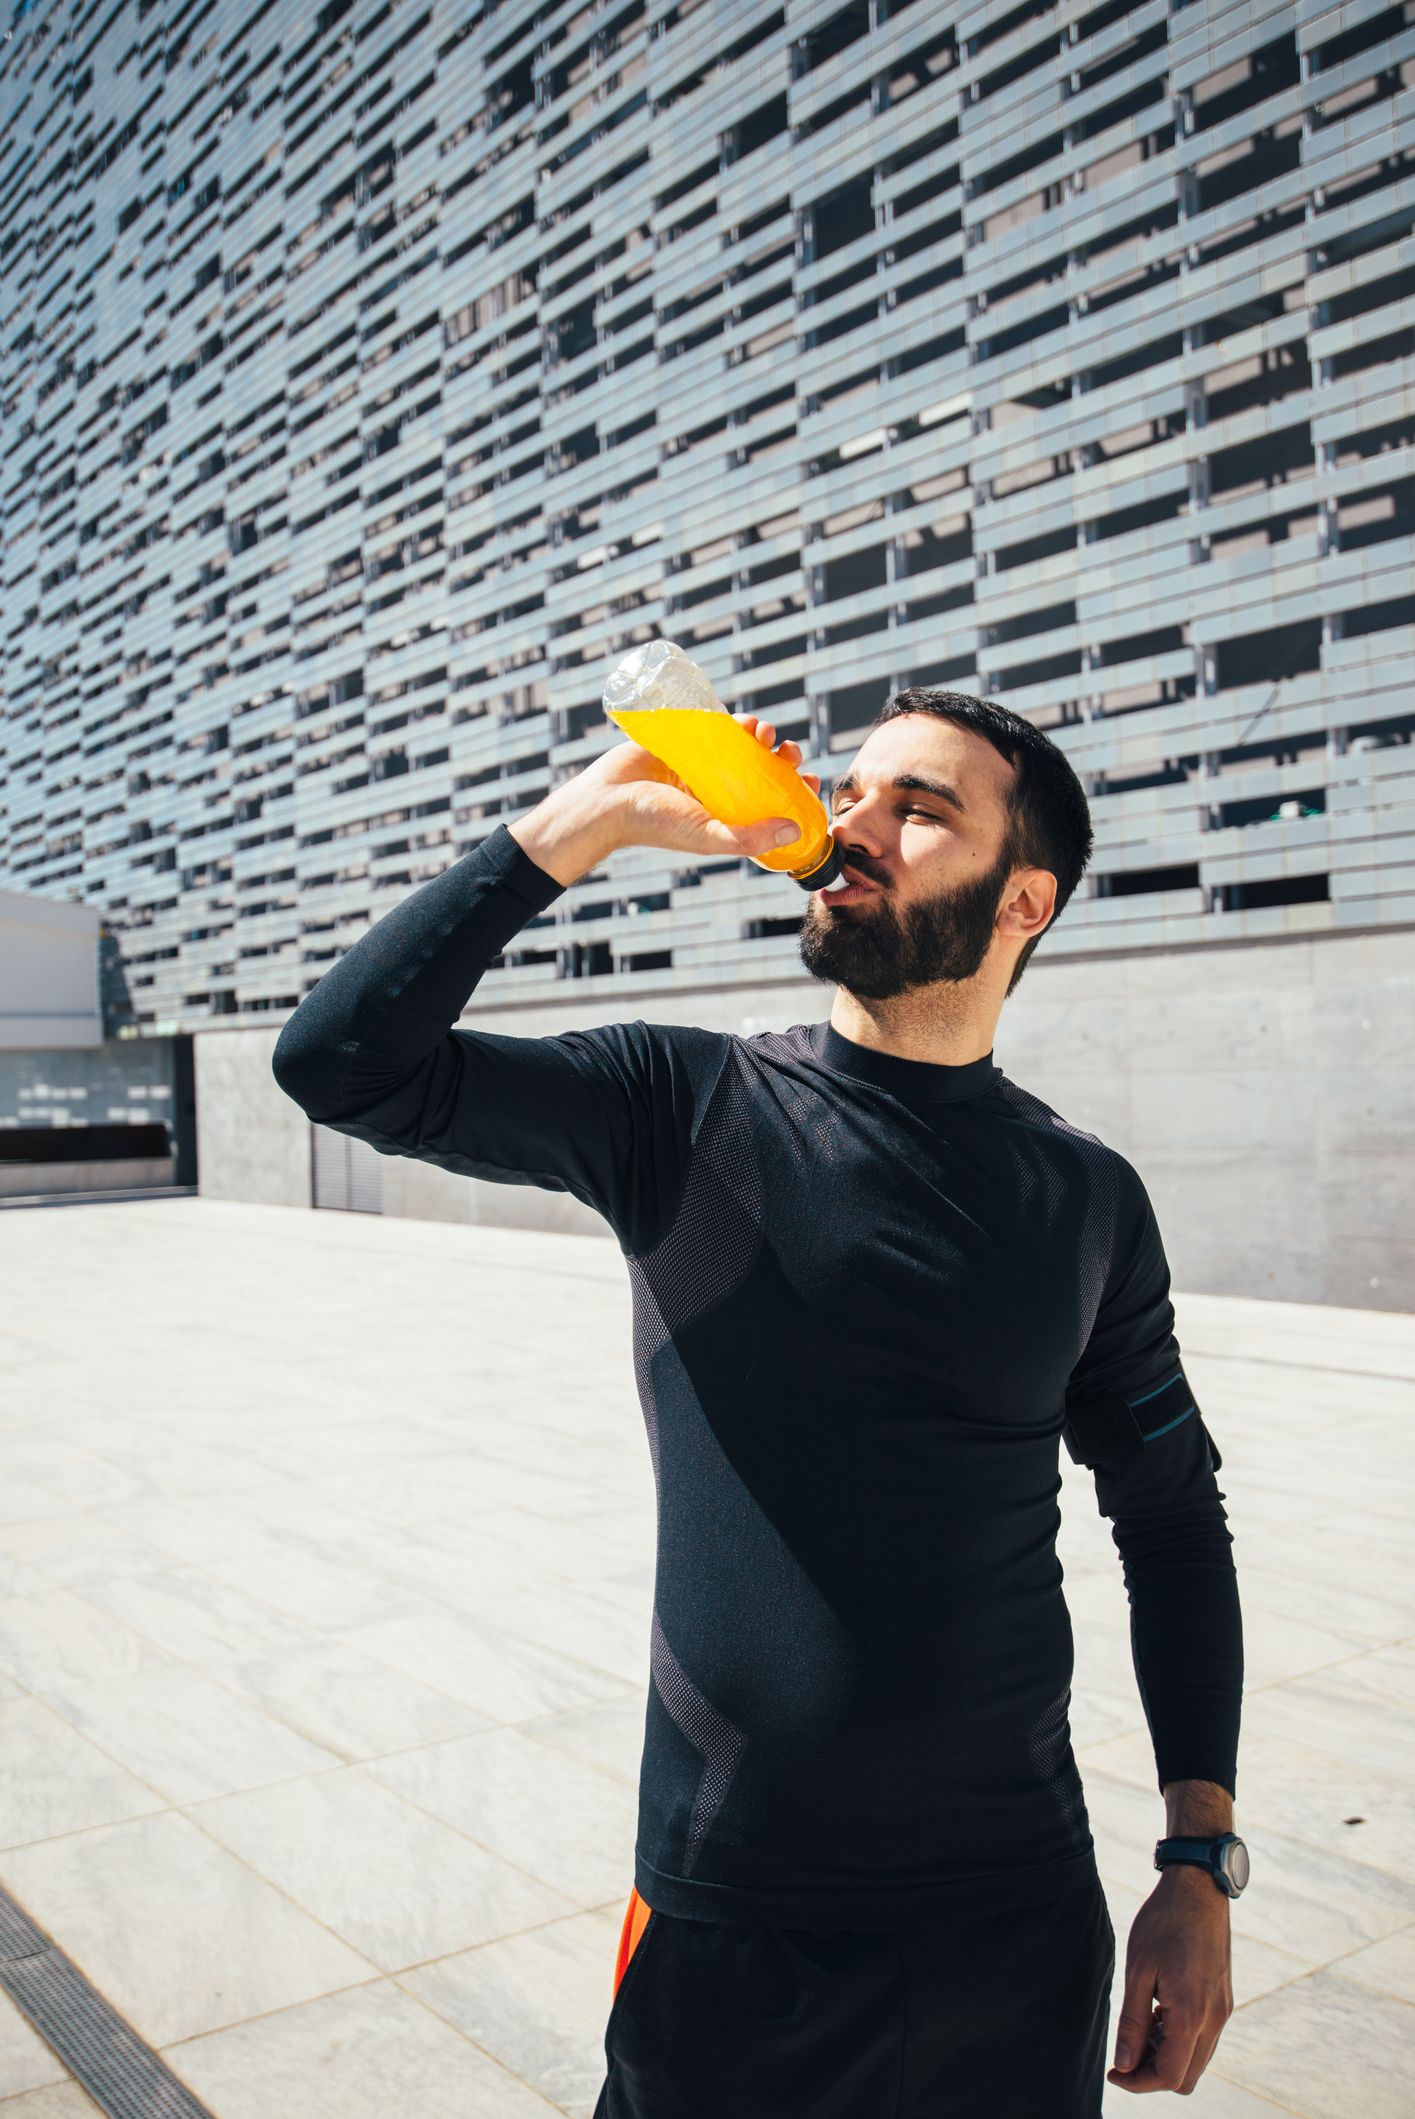 Three Hydration Data Points to Track For Your Next Event